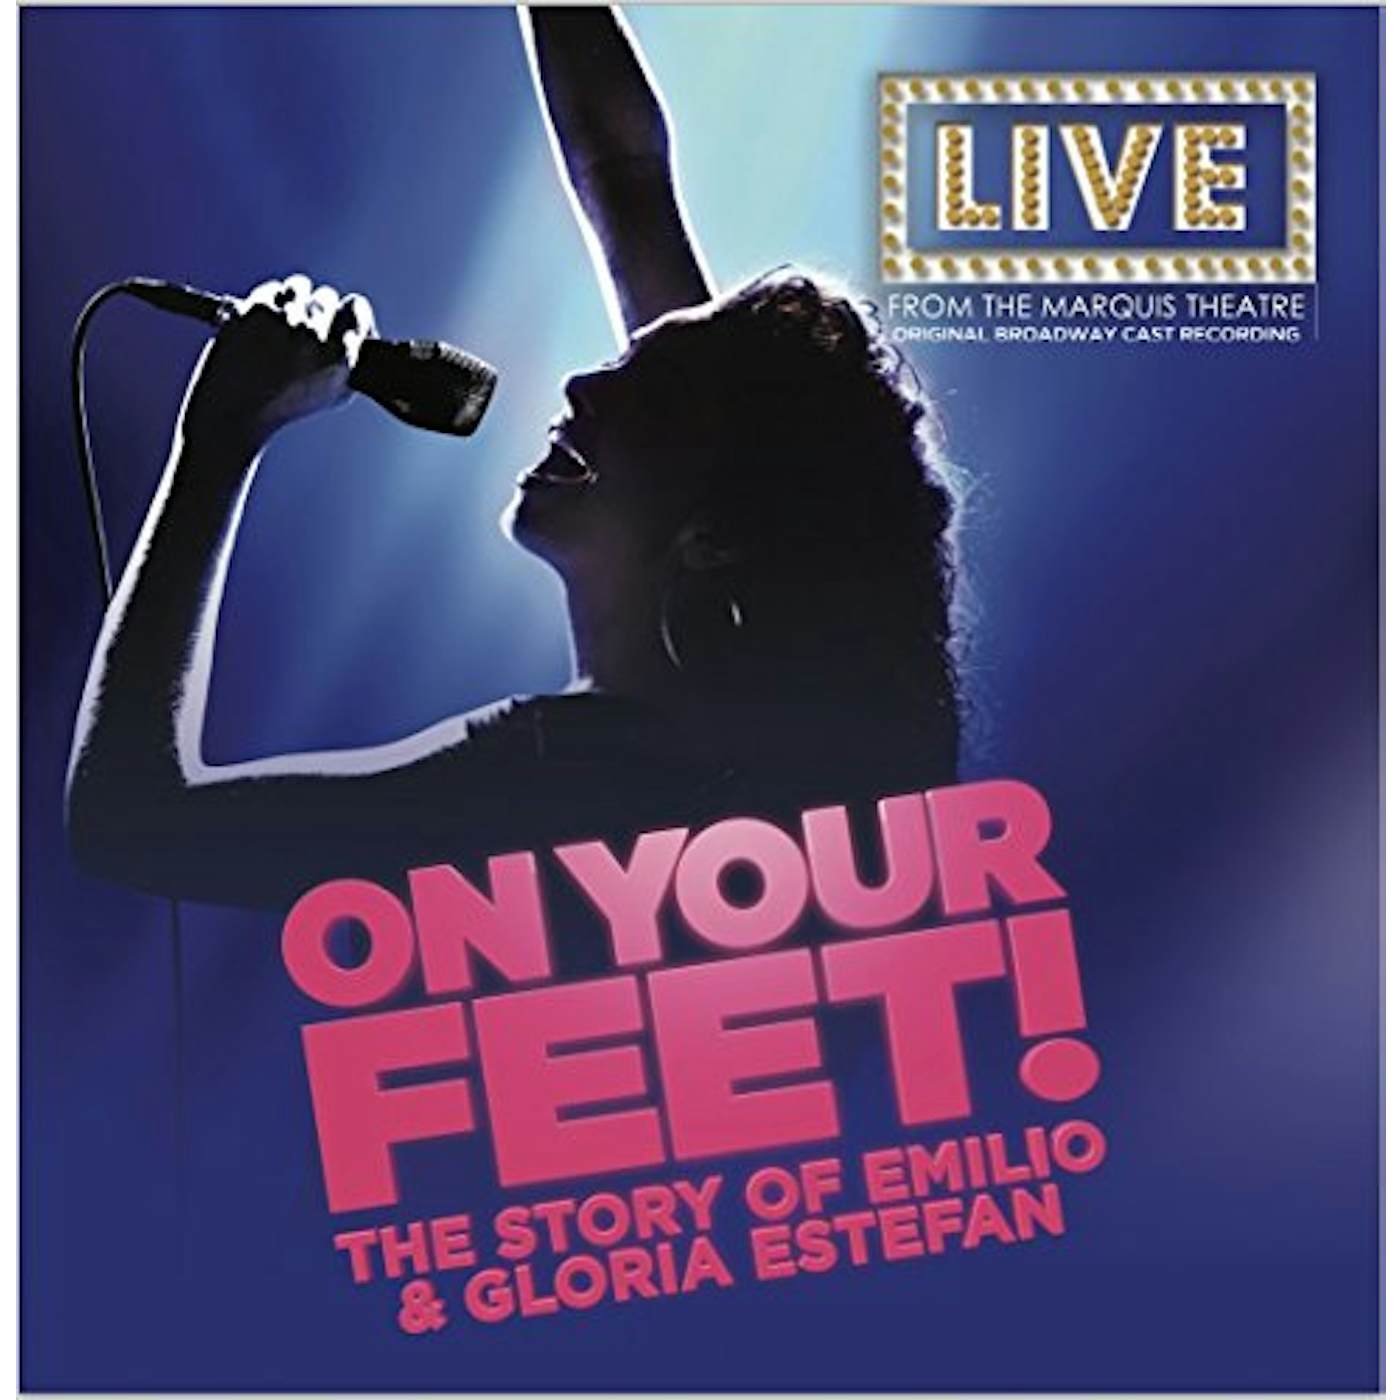 ON YOUR FEET: THE STORY OF EMILIO & GLORIA ON YOU FEET: THE STORY OF EMILIO & GLORIA / O.B.C. Vinyl Record